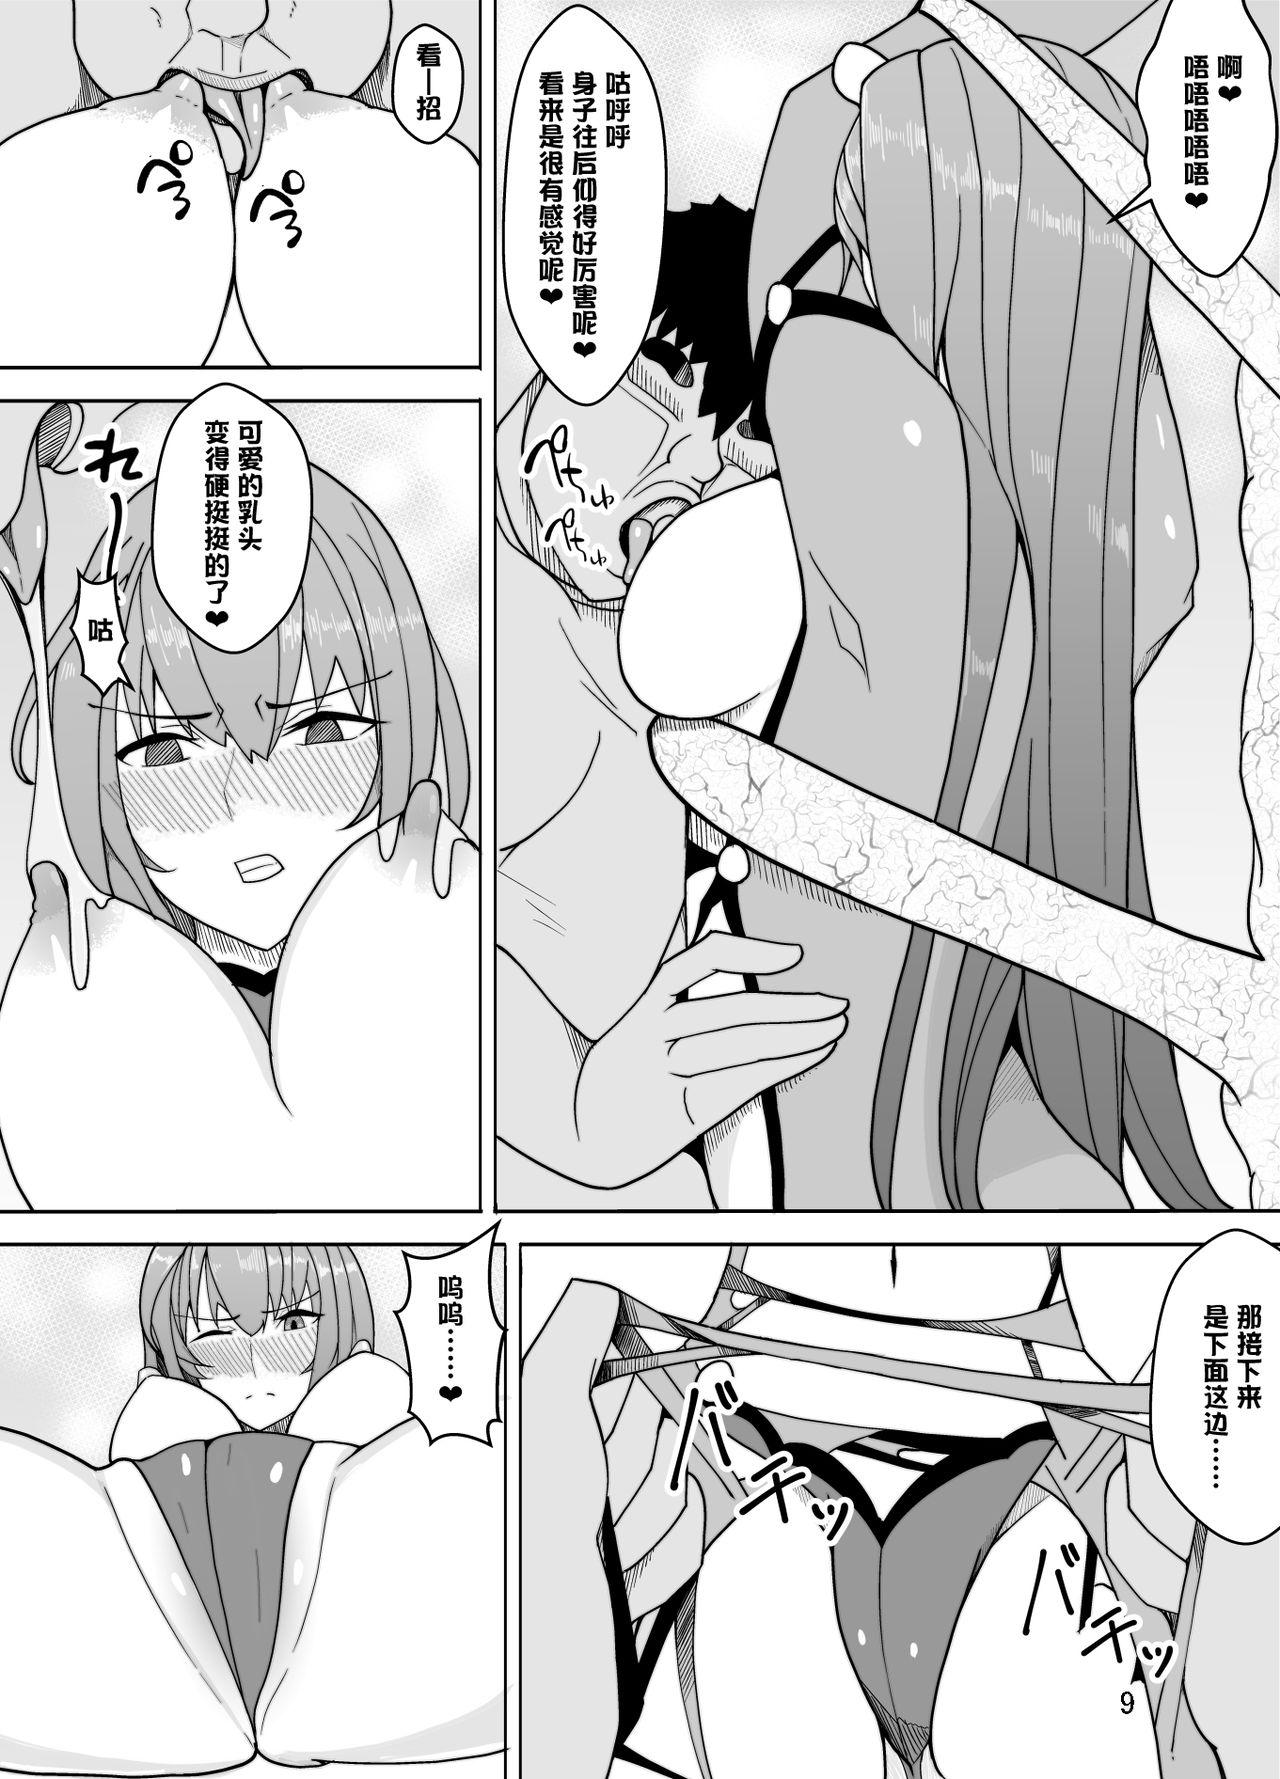 Slutty Scathach e no Choukyou - Fate grand order Longhair - Page 10